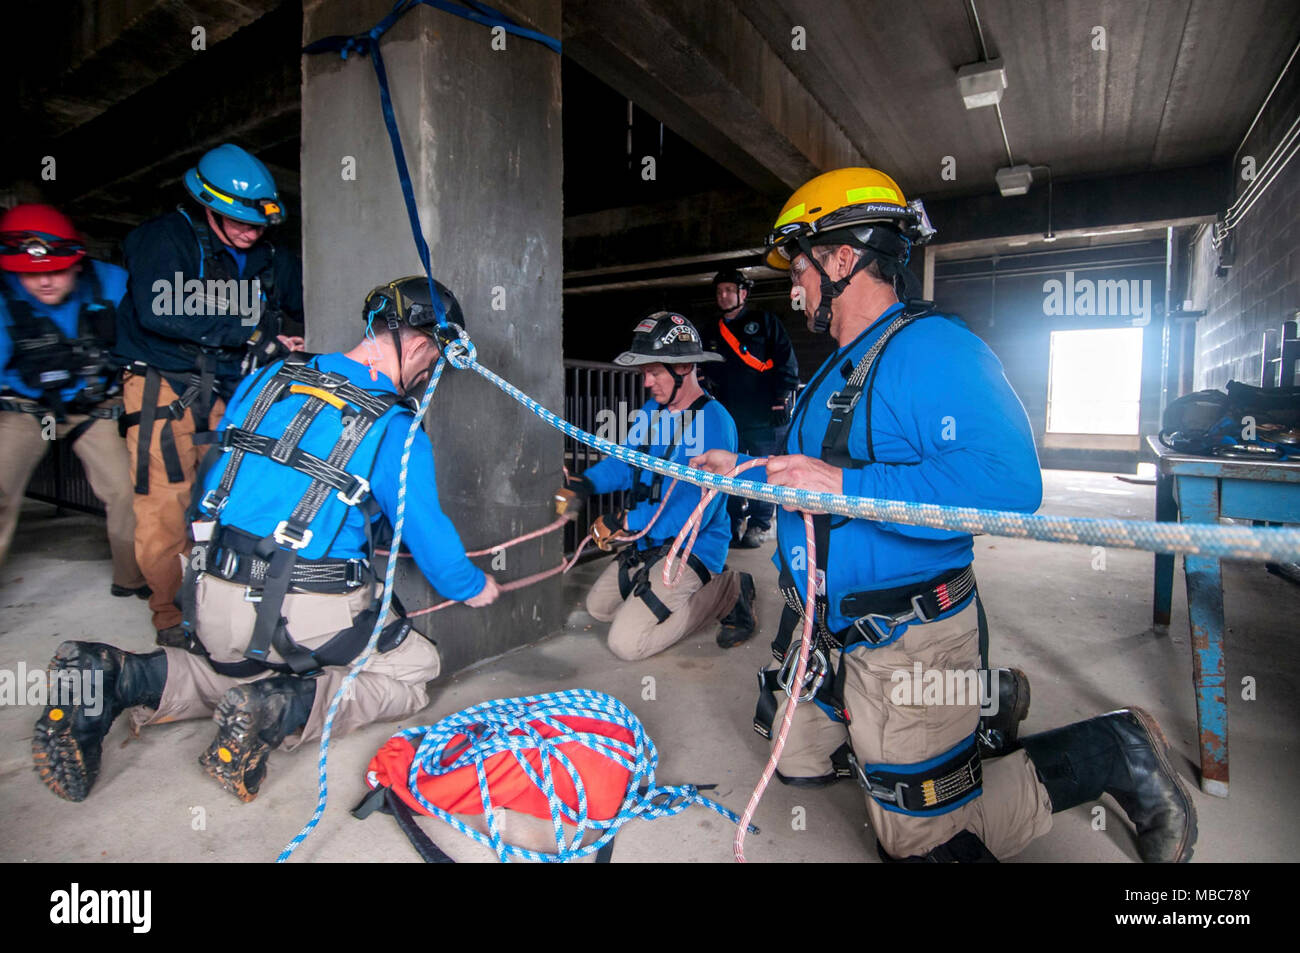 Firefighters from the Mississippi Task Force, Urban Search and Rescue team secure a system of ropes to enable their teammate’s escape from a simulated collapsed building during the training exercise PATRIOT South 18, at Camp Shelby, Miss. on Feb. 14, 2018. PATRIOT South, a joint-agency domestic operations training exercise, focuses on natural disaster preparedness for not only National Guard units from across the nation, but also civilian first responders. (Ohio Air National Guard Stock Photo